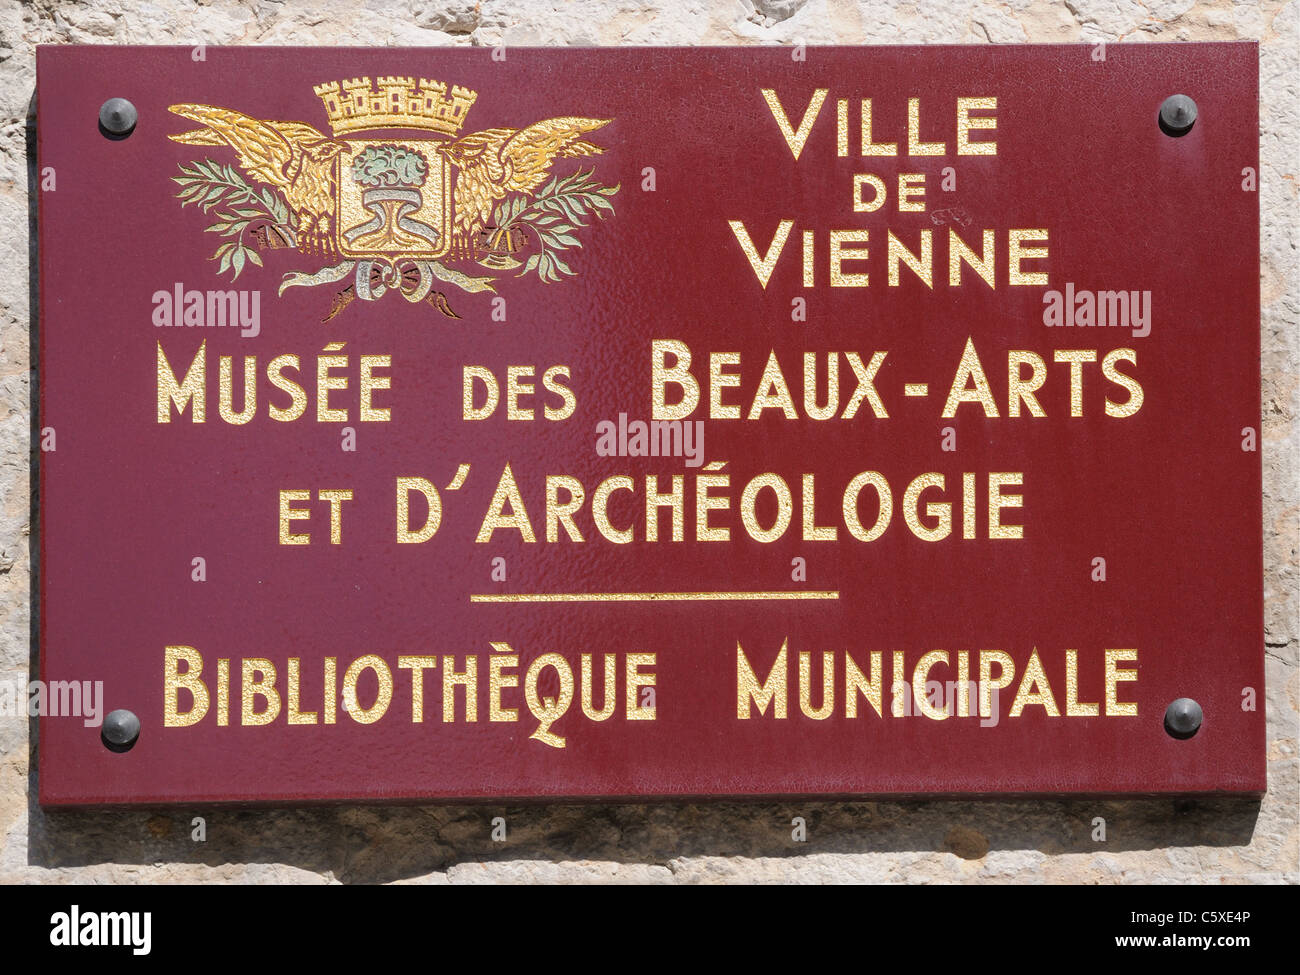 Sign on Art Museum or Musee des Beaux Arts et d Archeologie and Municpal Library or Bibliotheque Municipal Vienne France Stock Photo